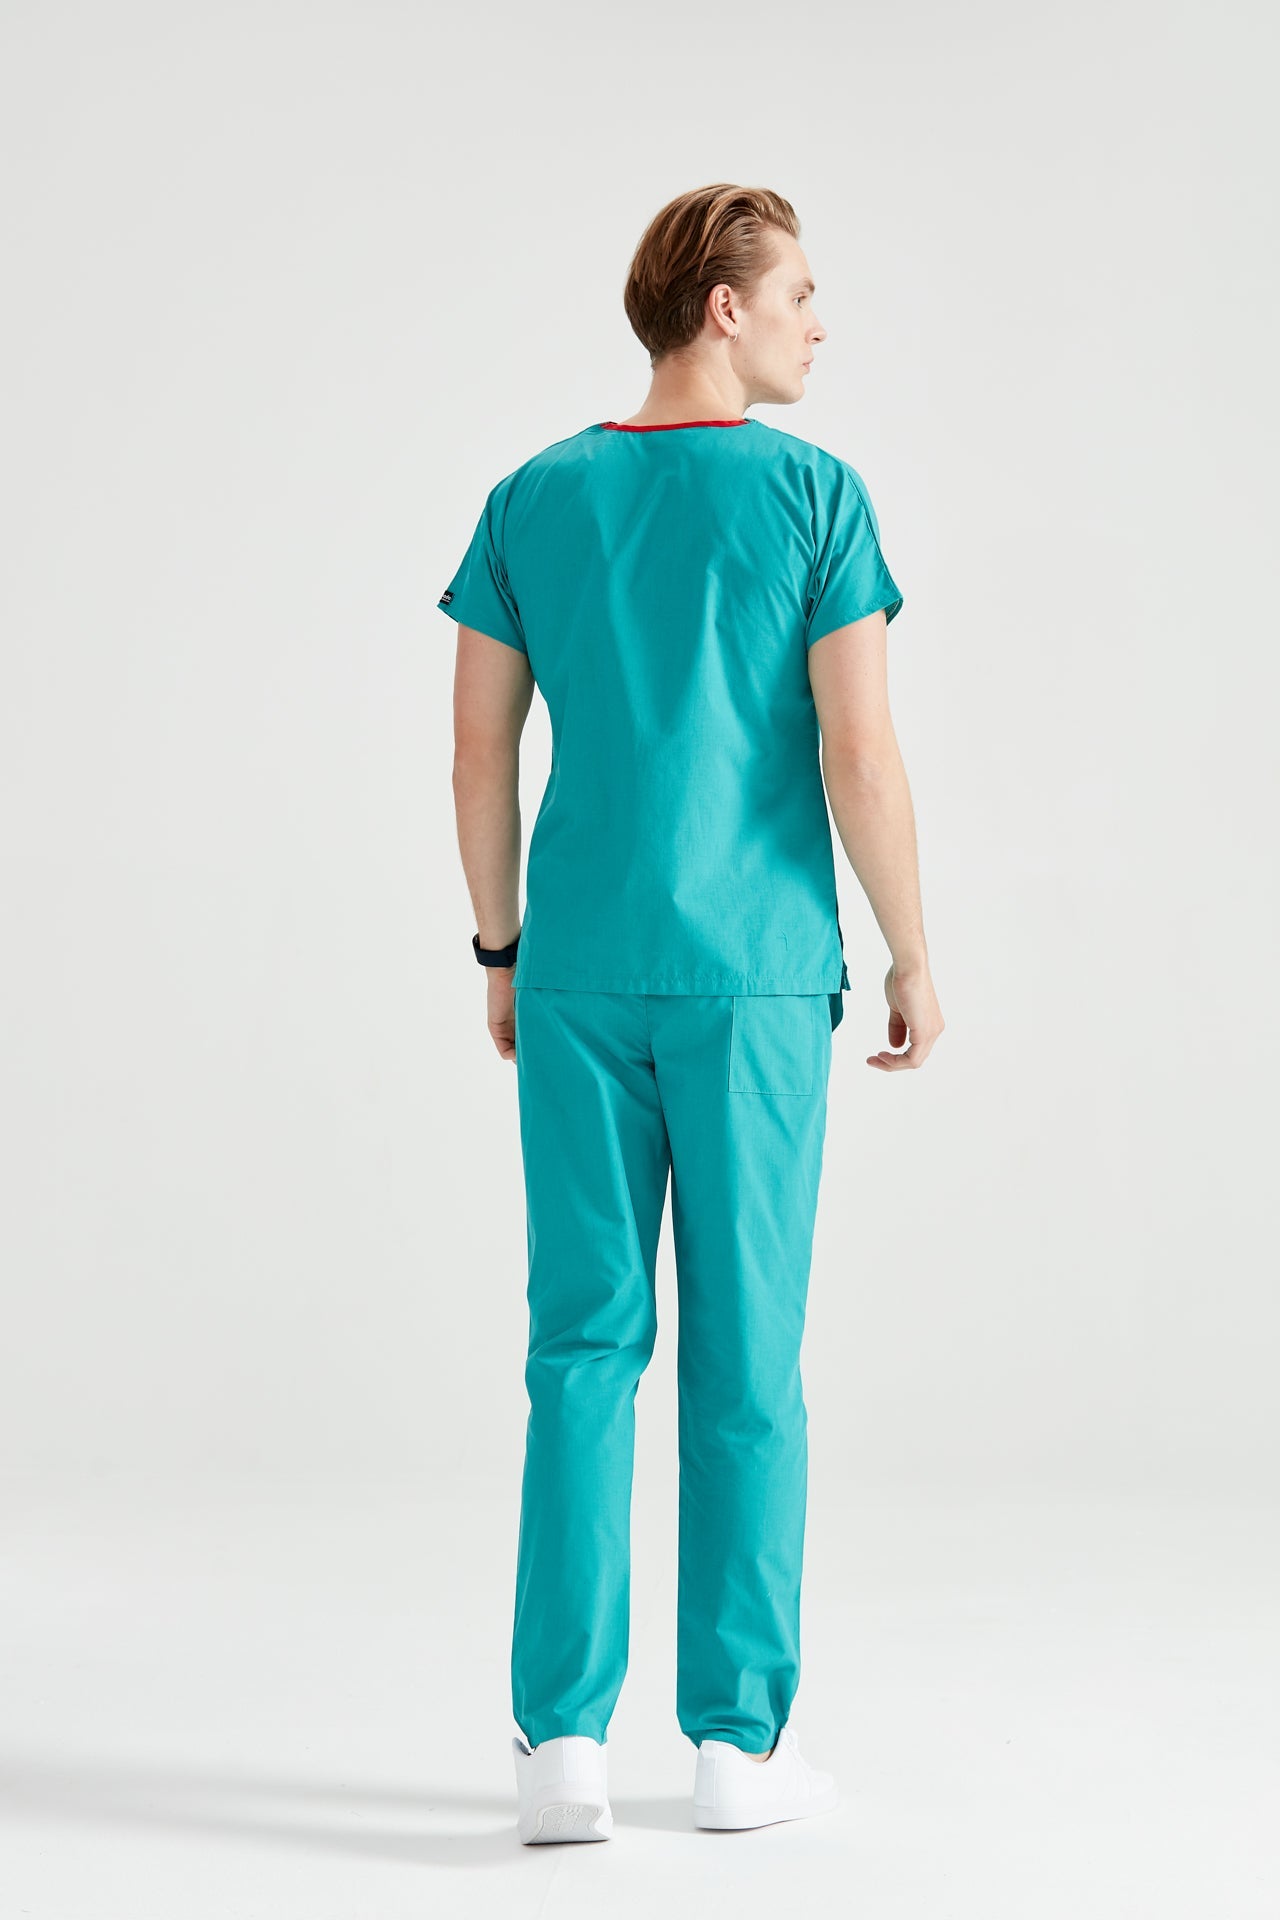 Surgical Green Medical Suit, Men - Surgical - Classic Model